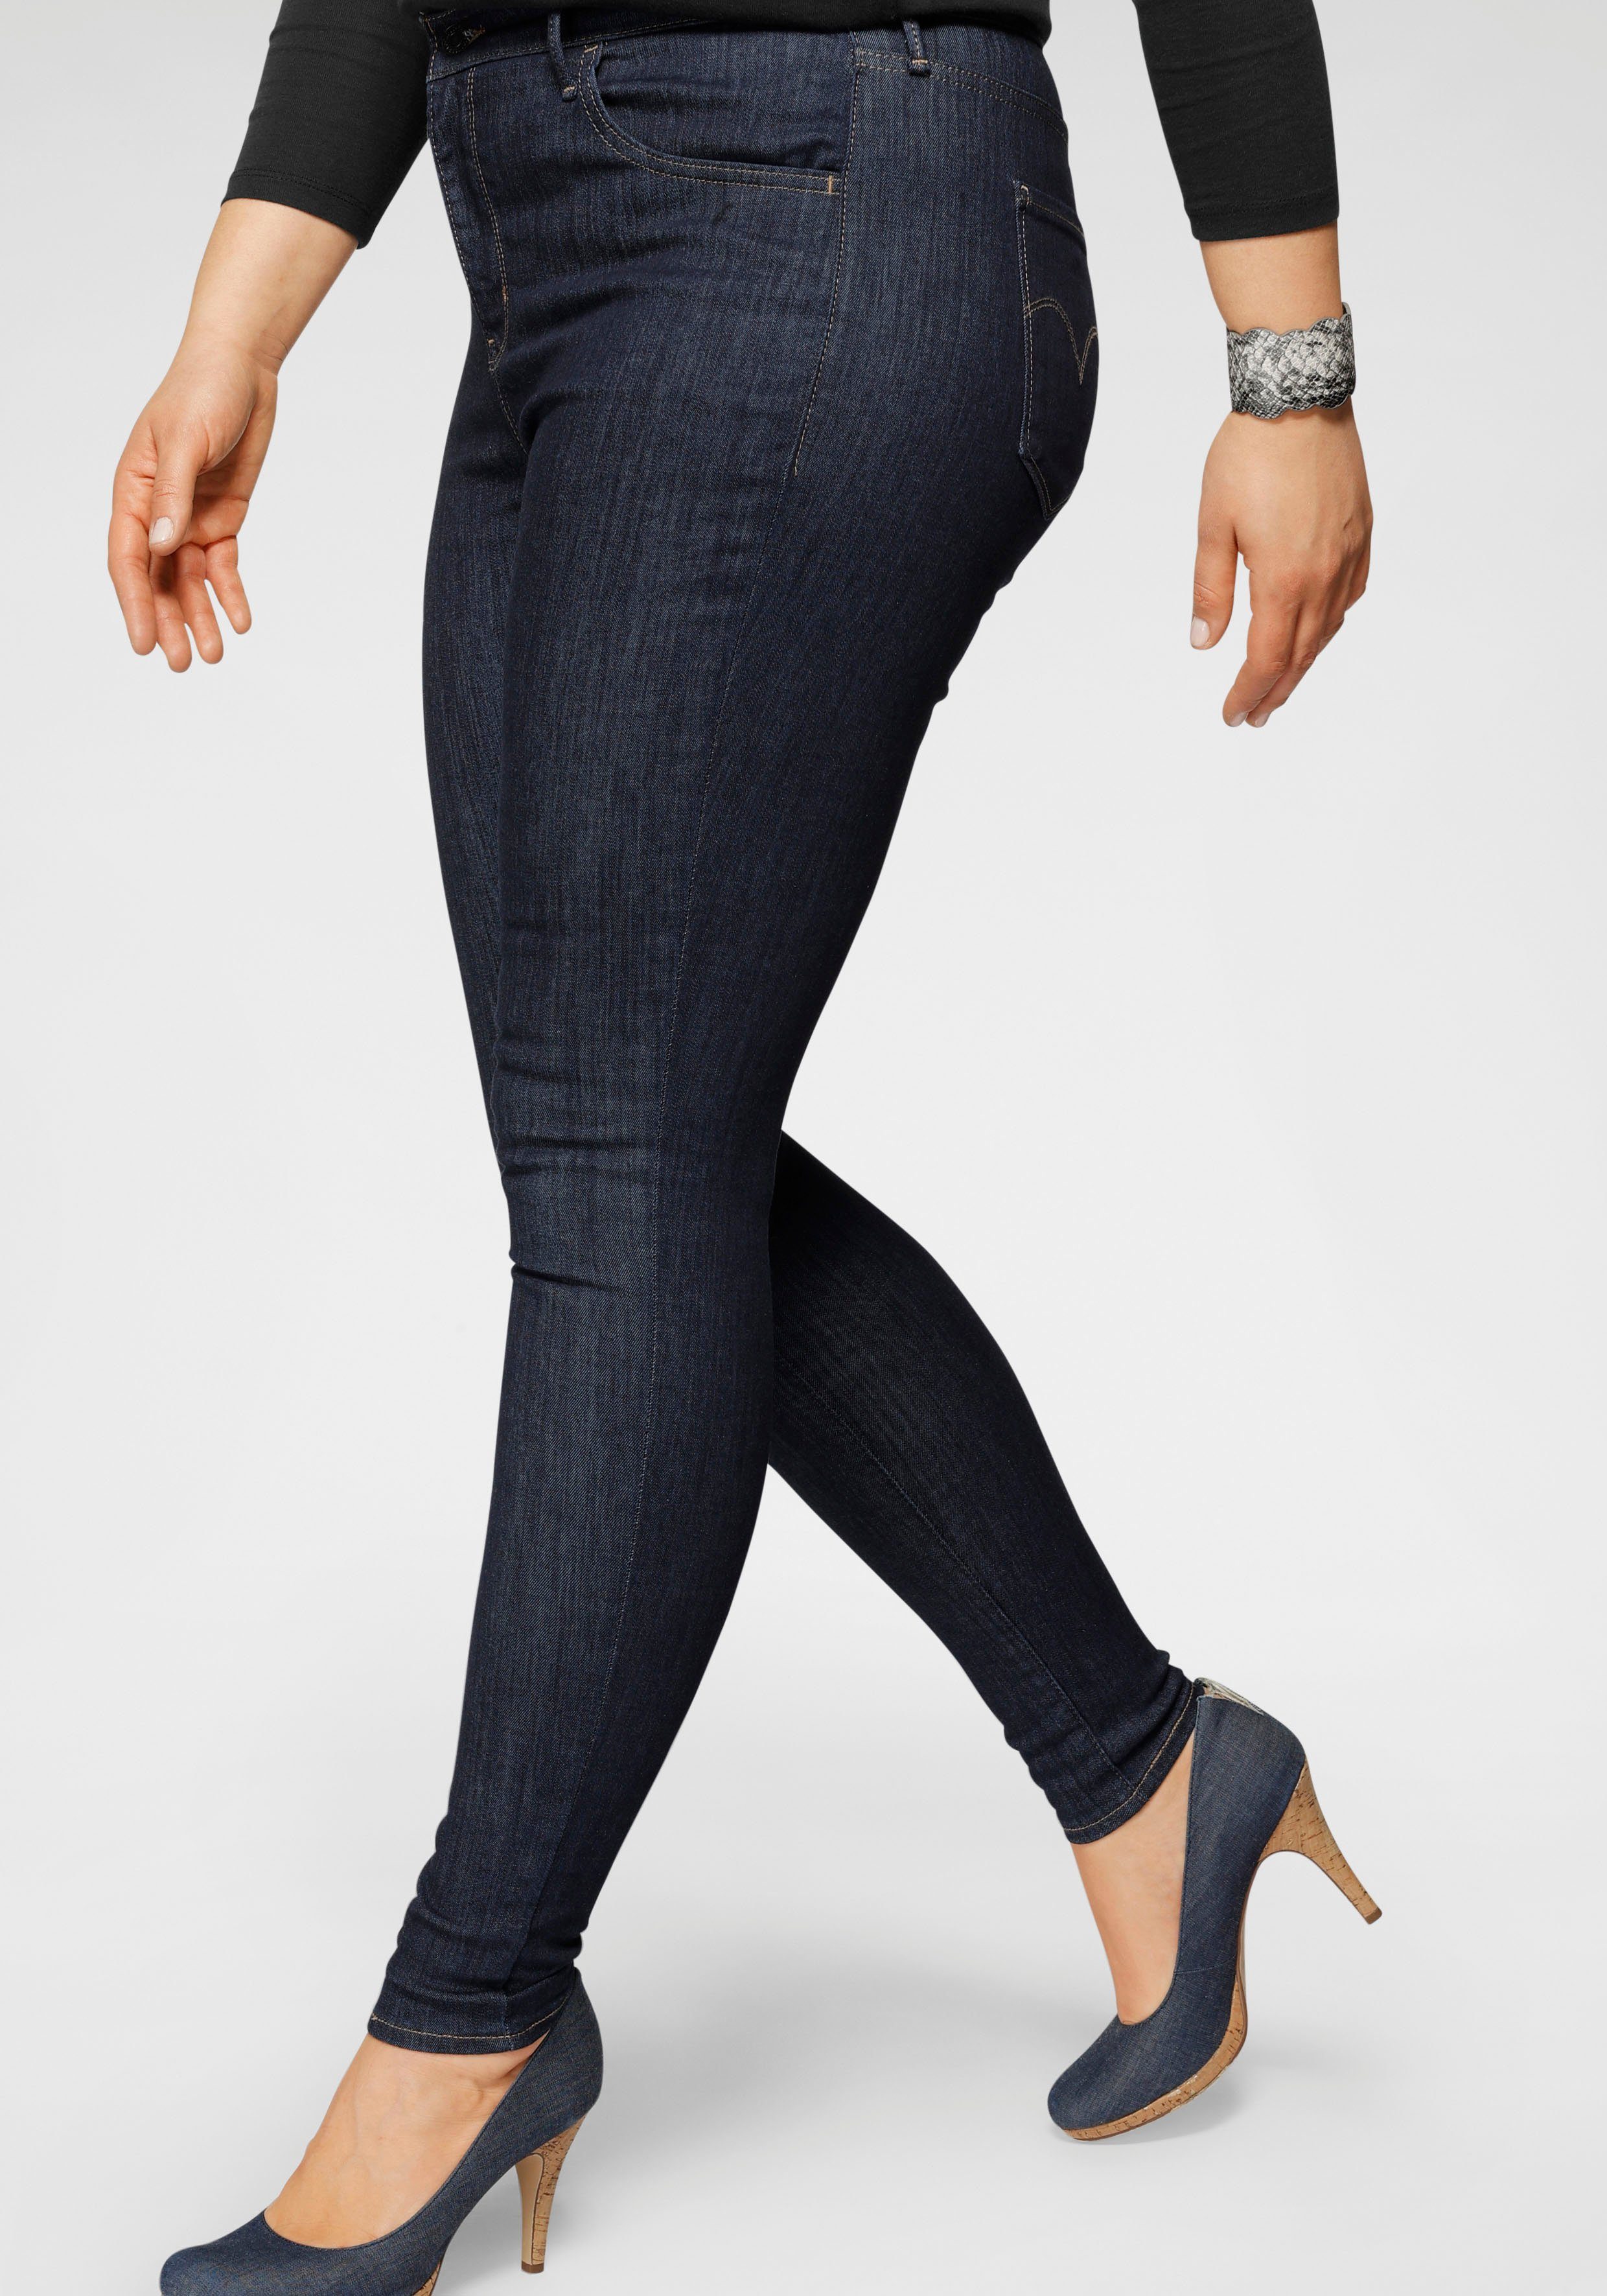 Levi's® Plus Skinny-fit-Jeans 720 High-Rise mit hoher Leibhöhe rinsed | Stretchjeans